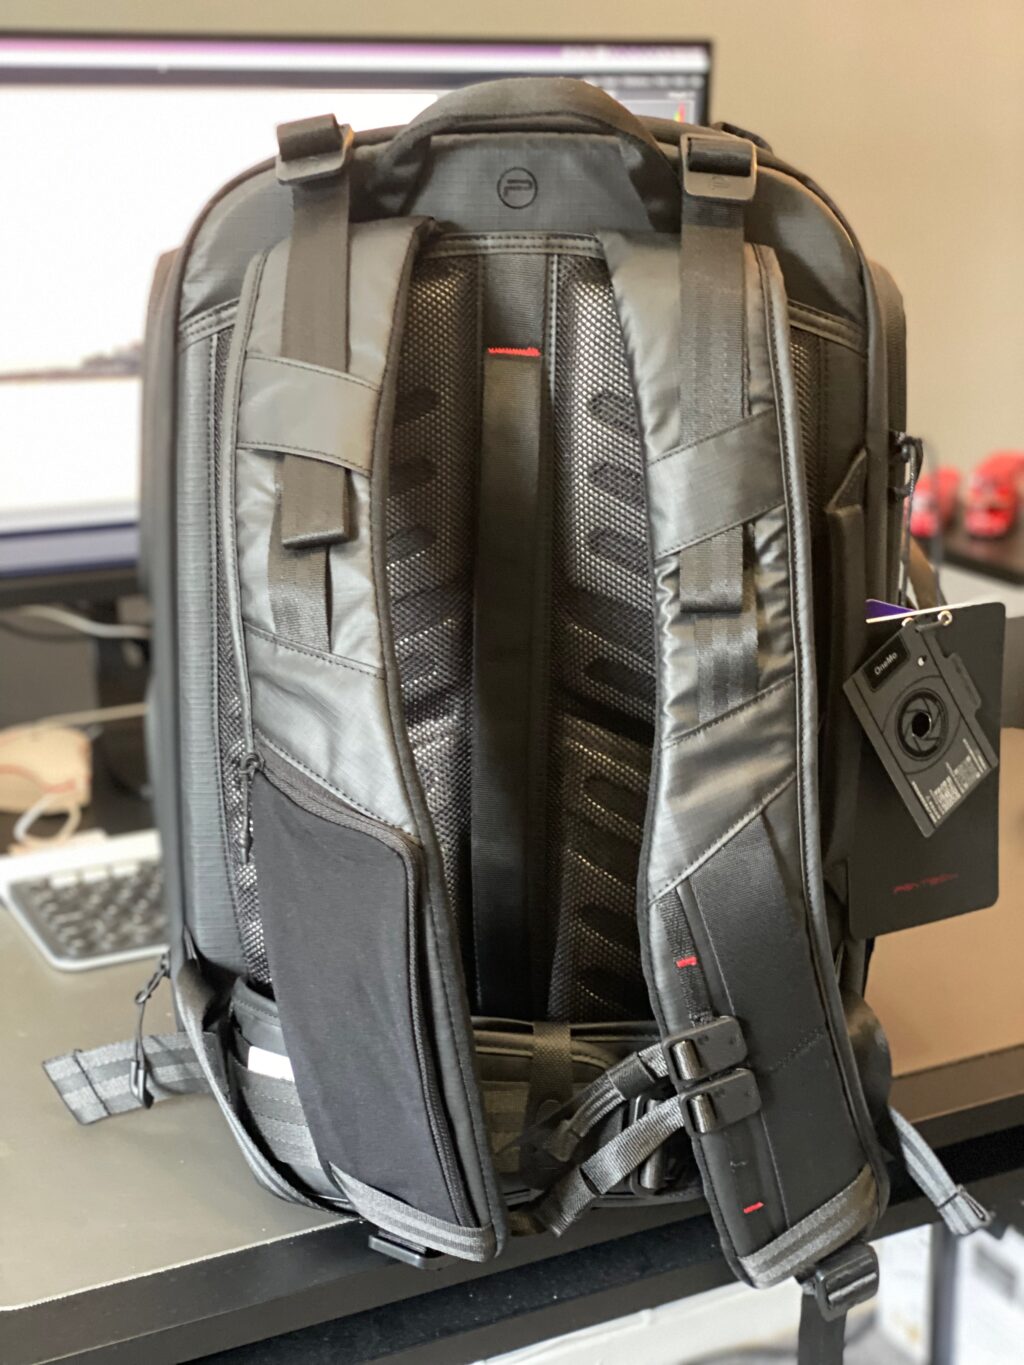 Rear view of a PGYTeck camera backpack